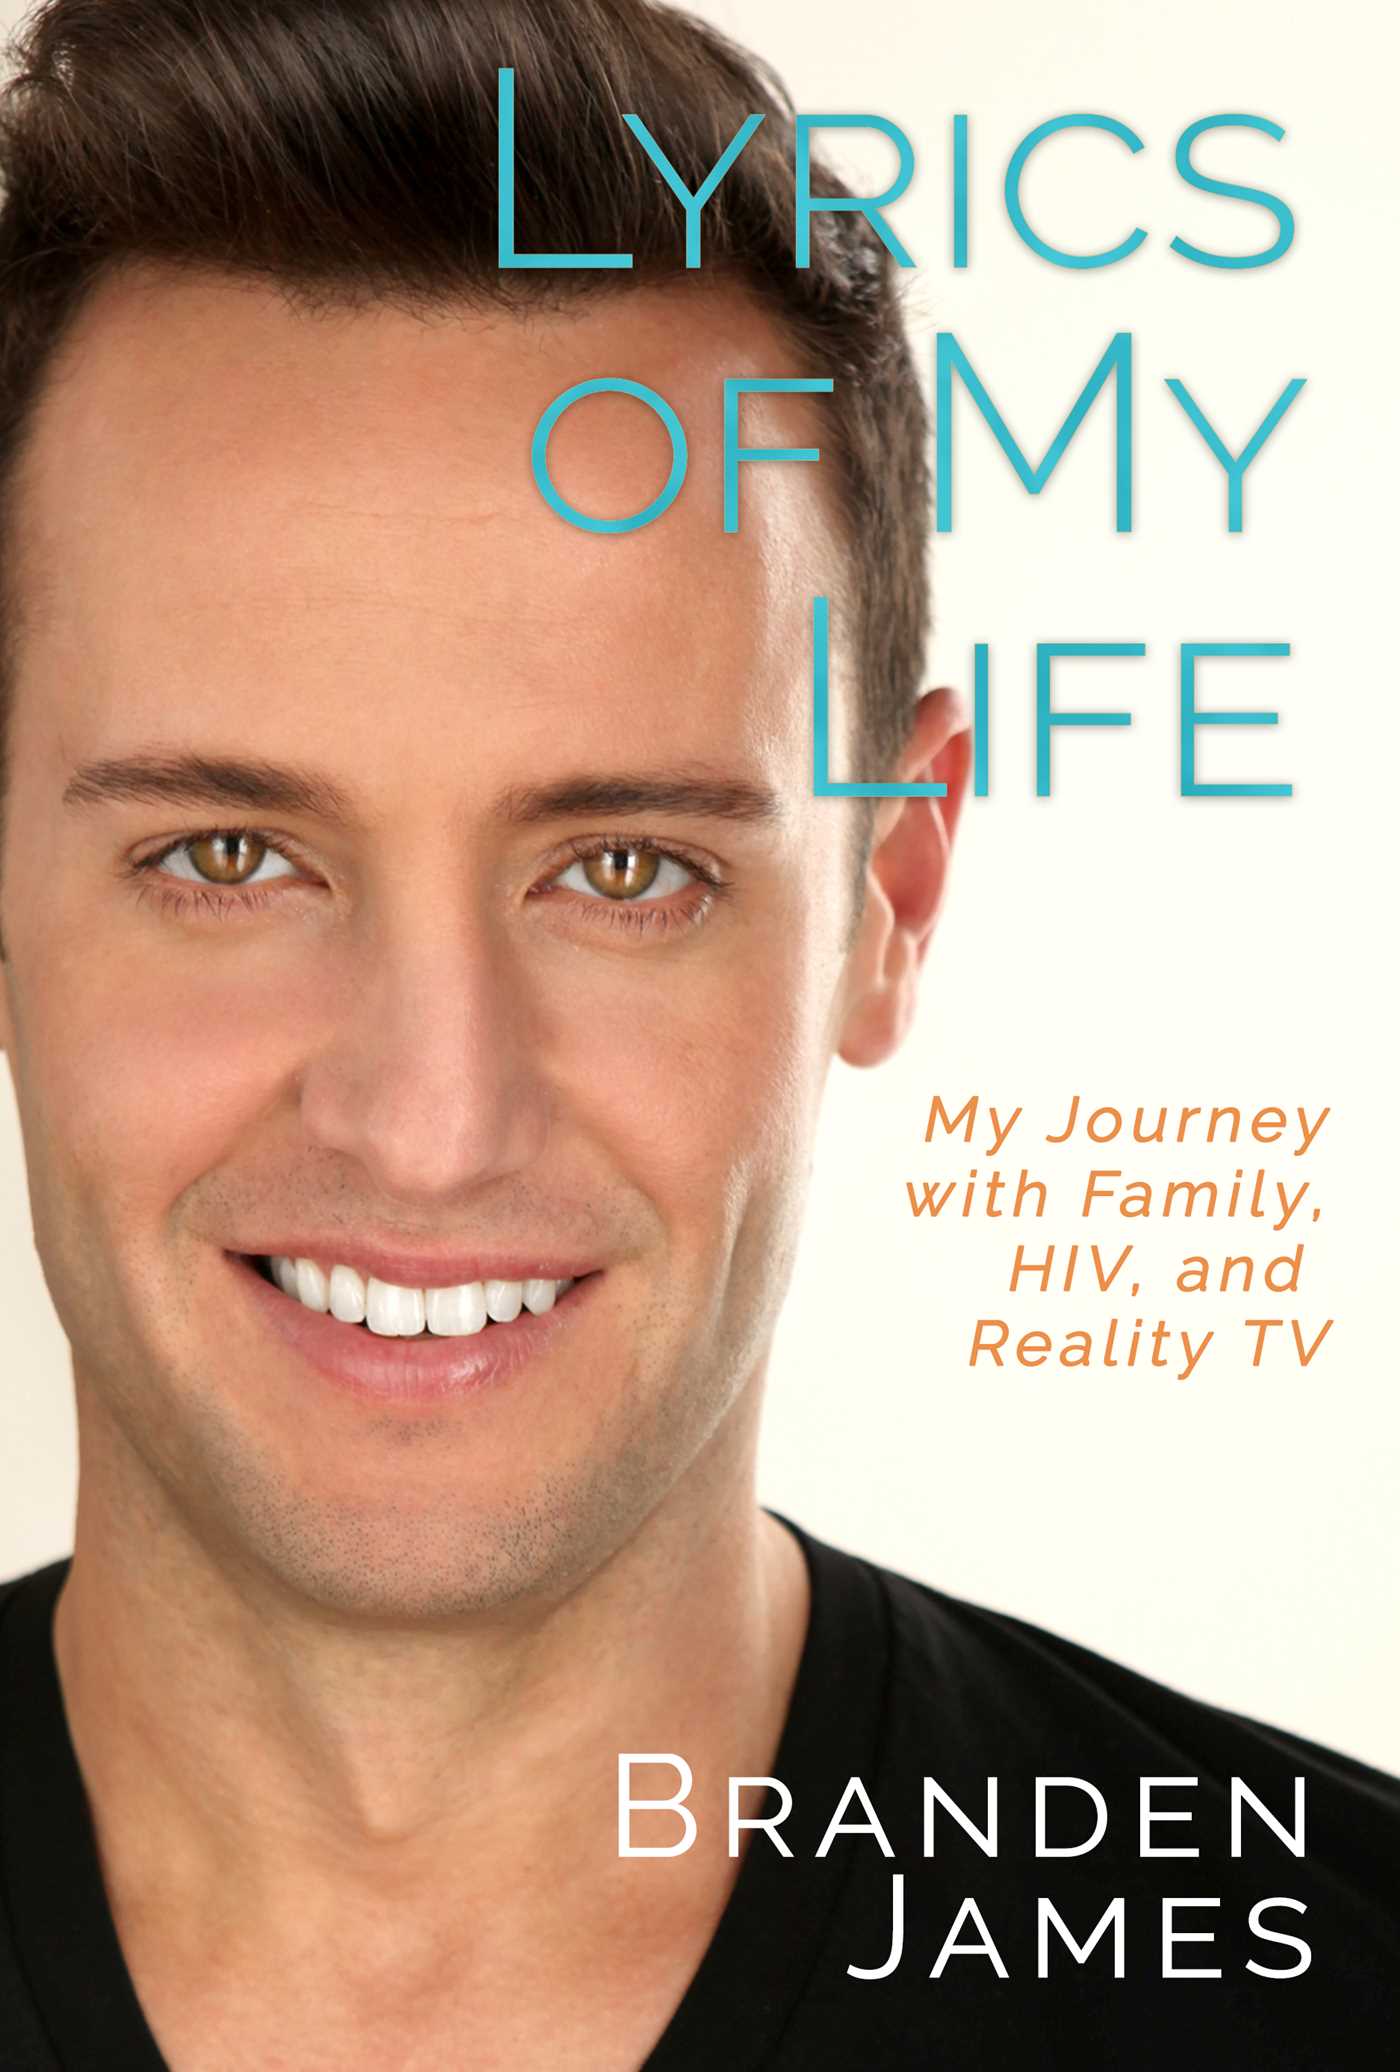 Lyrics of My Life: My Journey with Family, HIV, and Reality TV